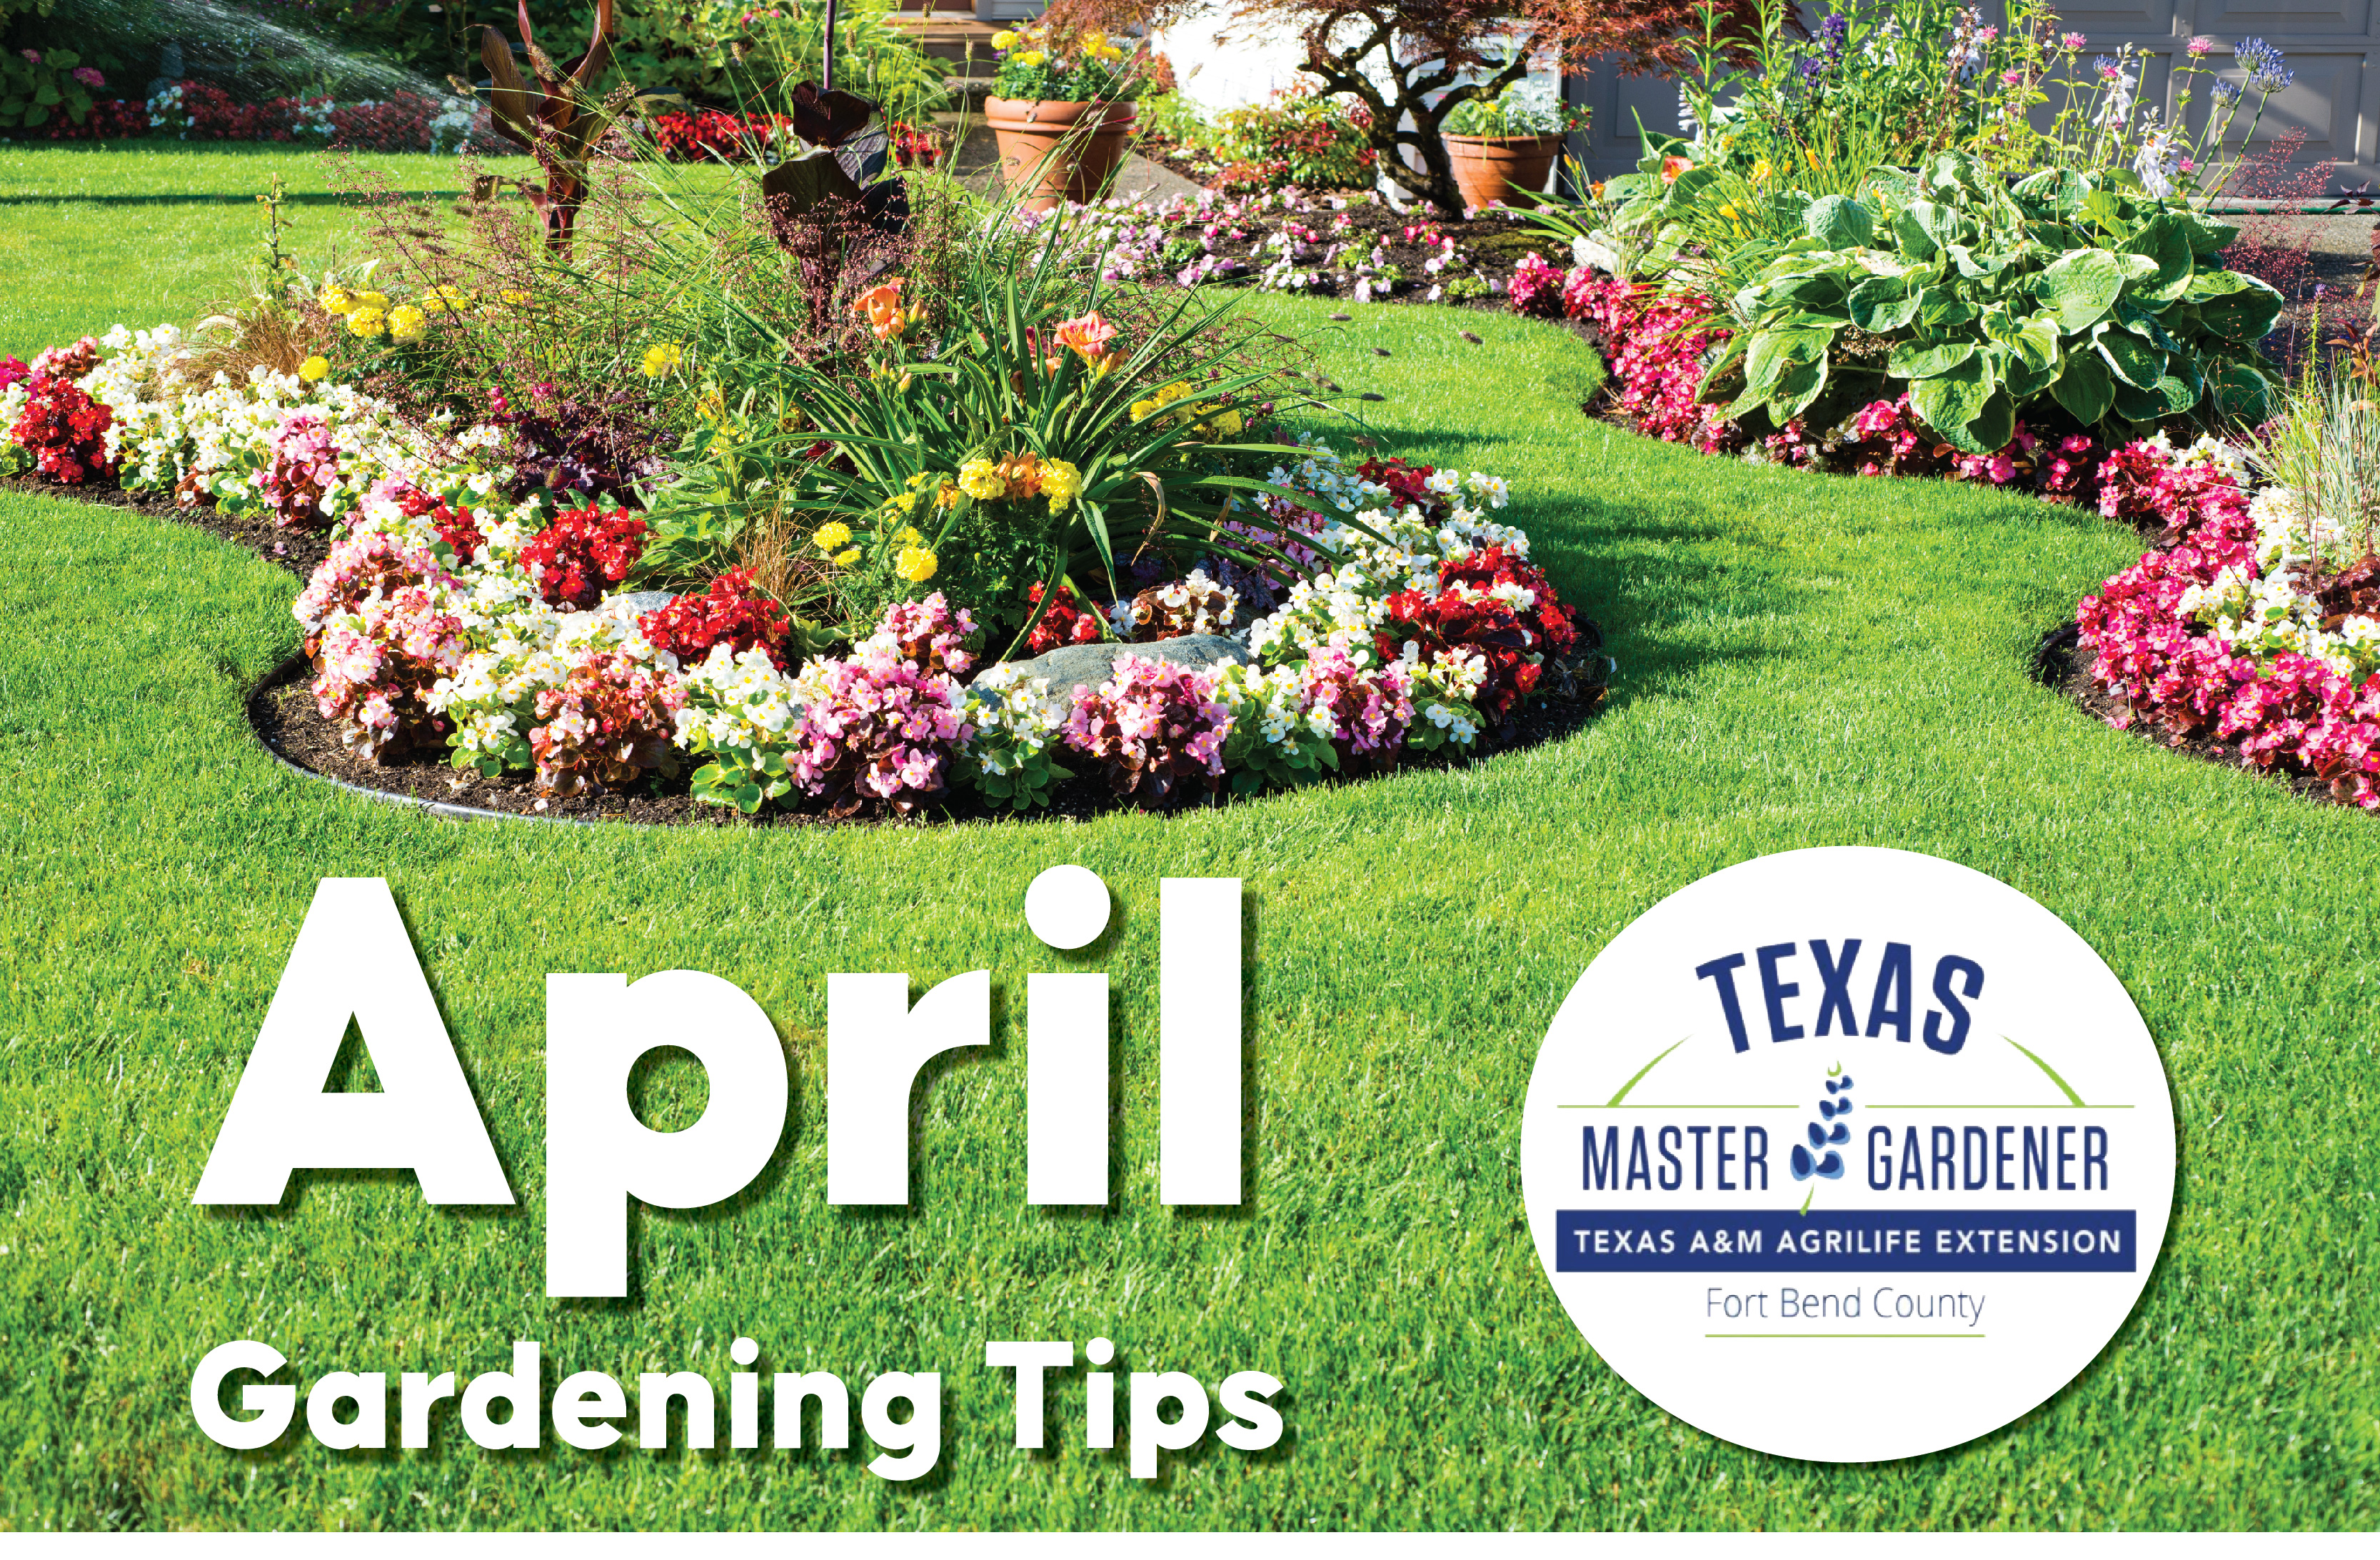 Fort Bend County Master Gardeners Shares Top Gardening Tips for April